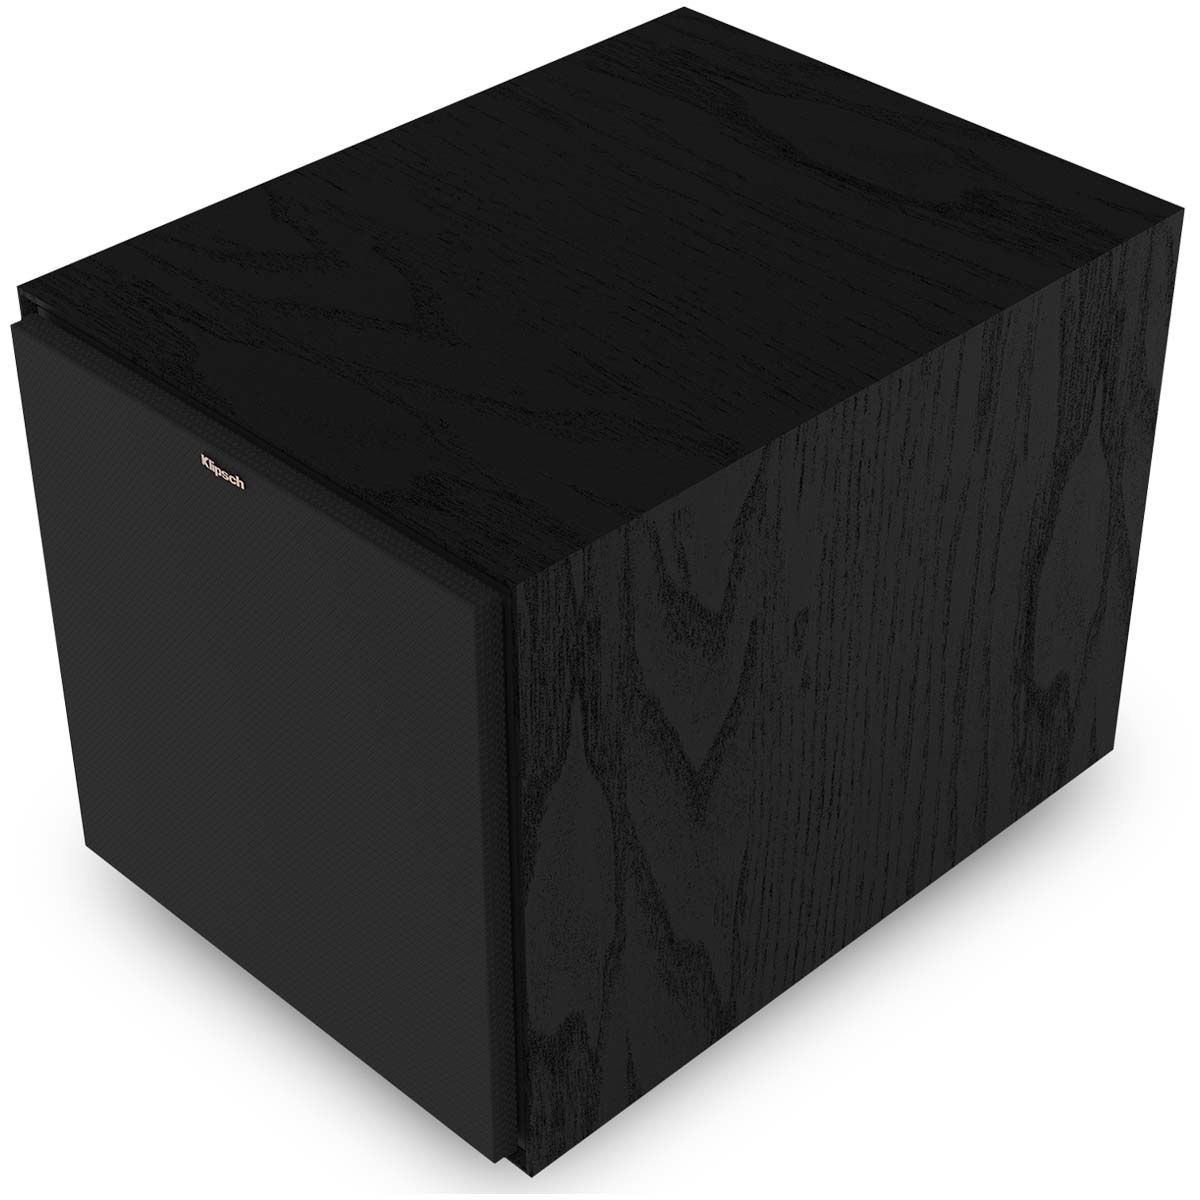 Klipsch R-101SW Subwoofer angled front view with grille